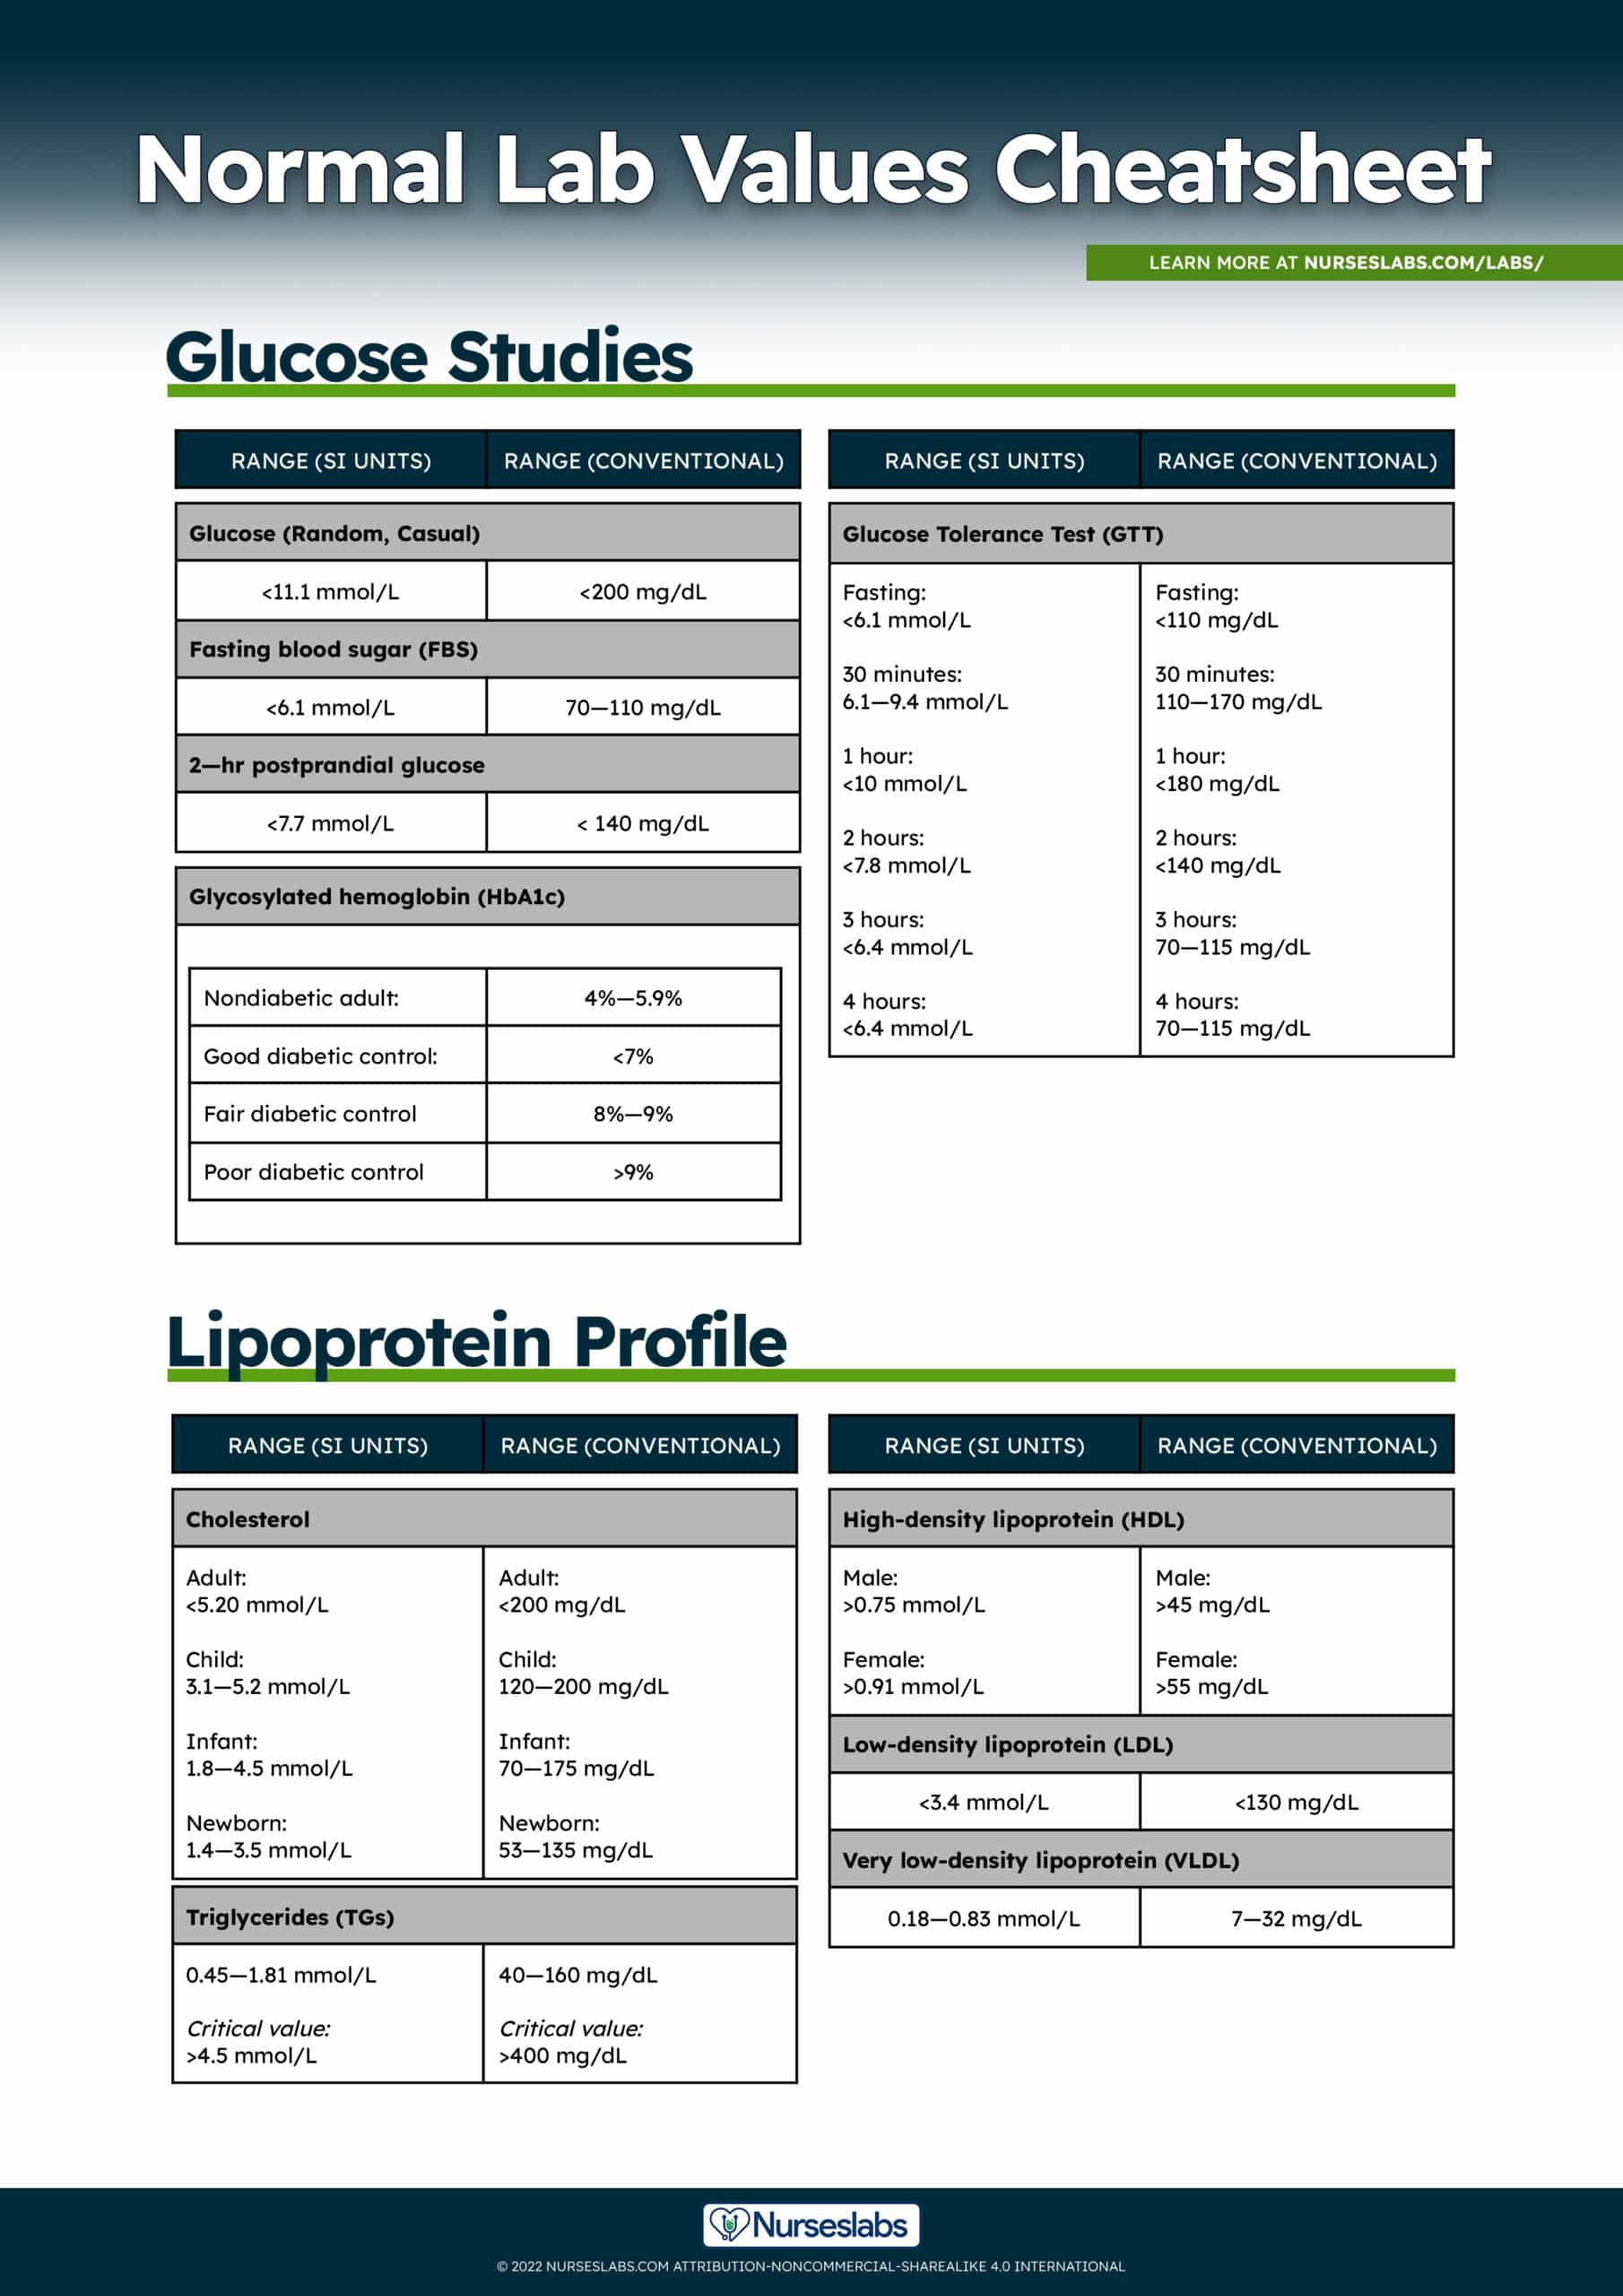 Normal Lab Values for Glucose Studies and Lipid Profile